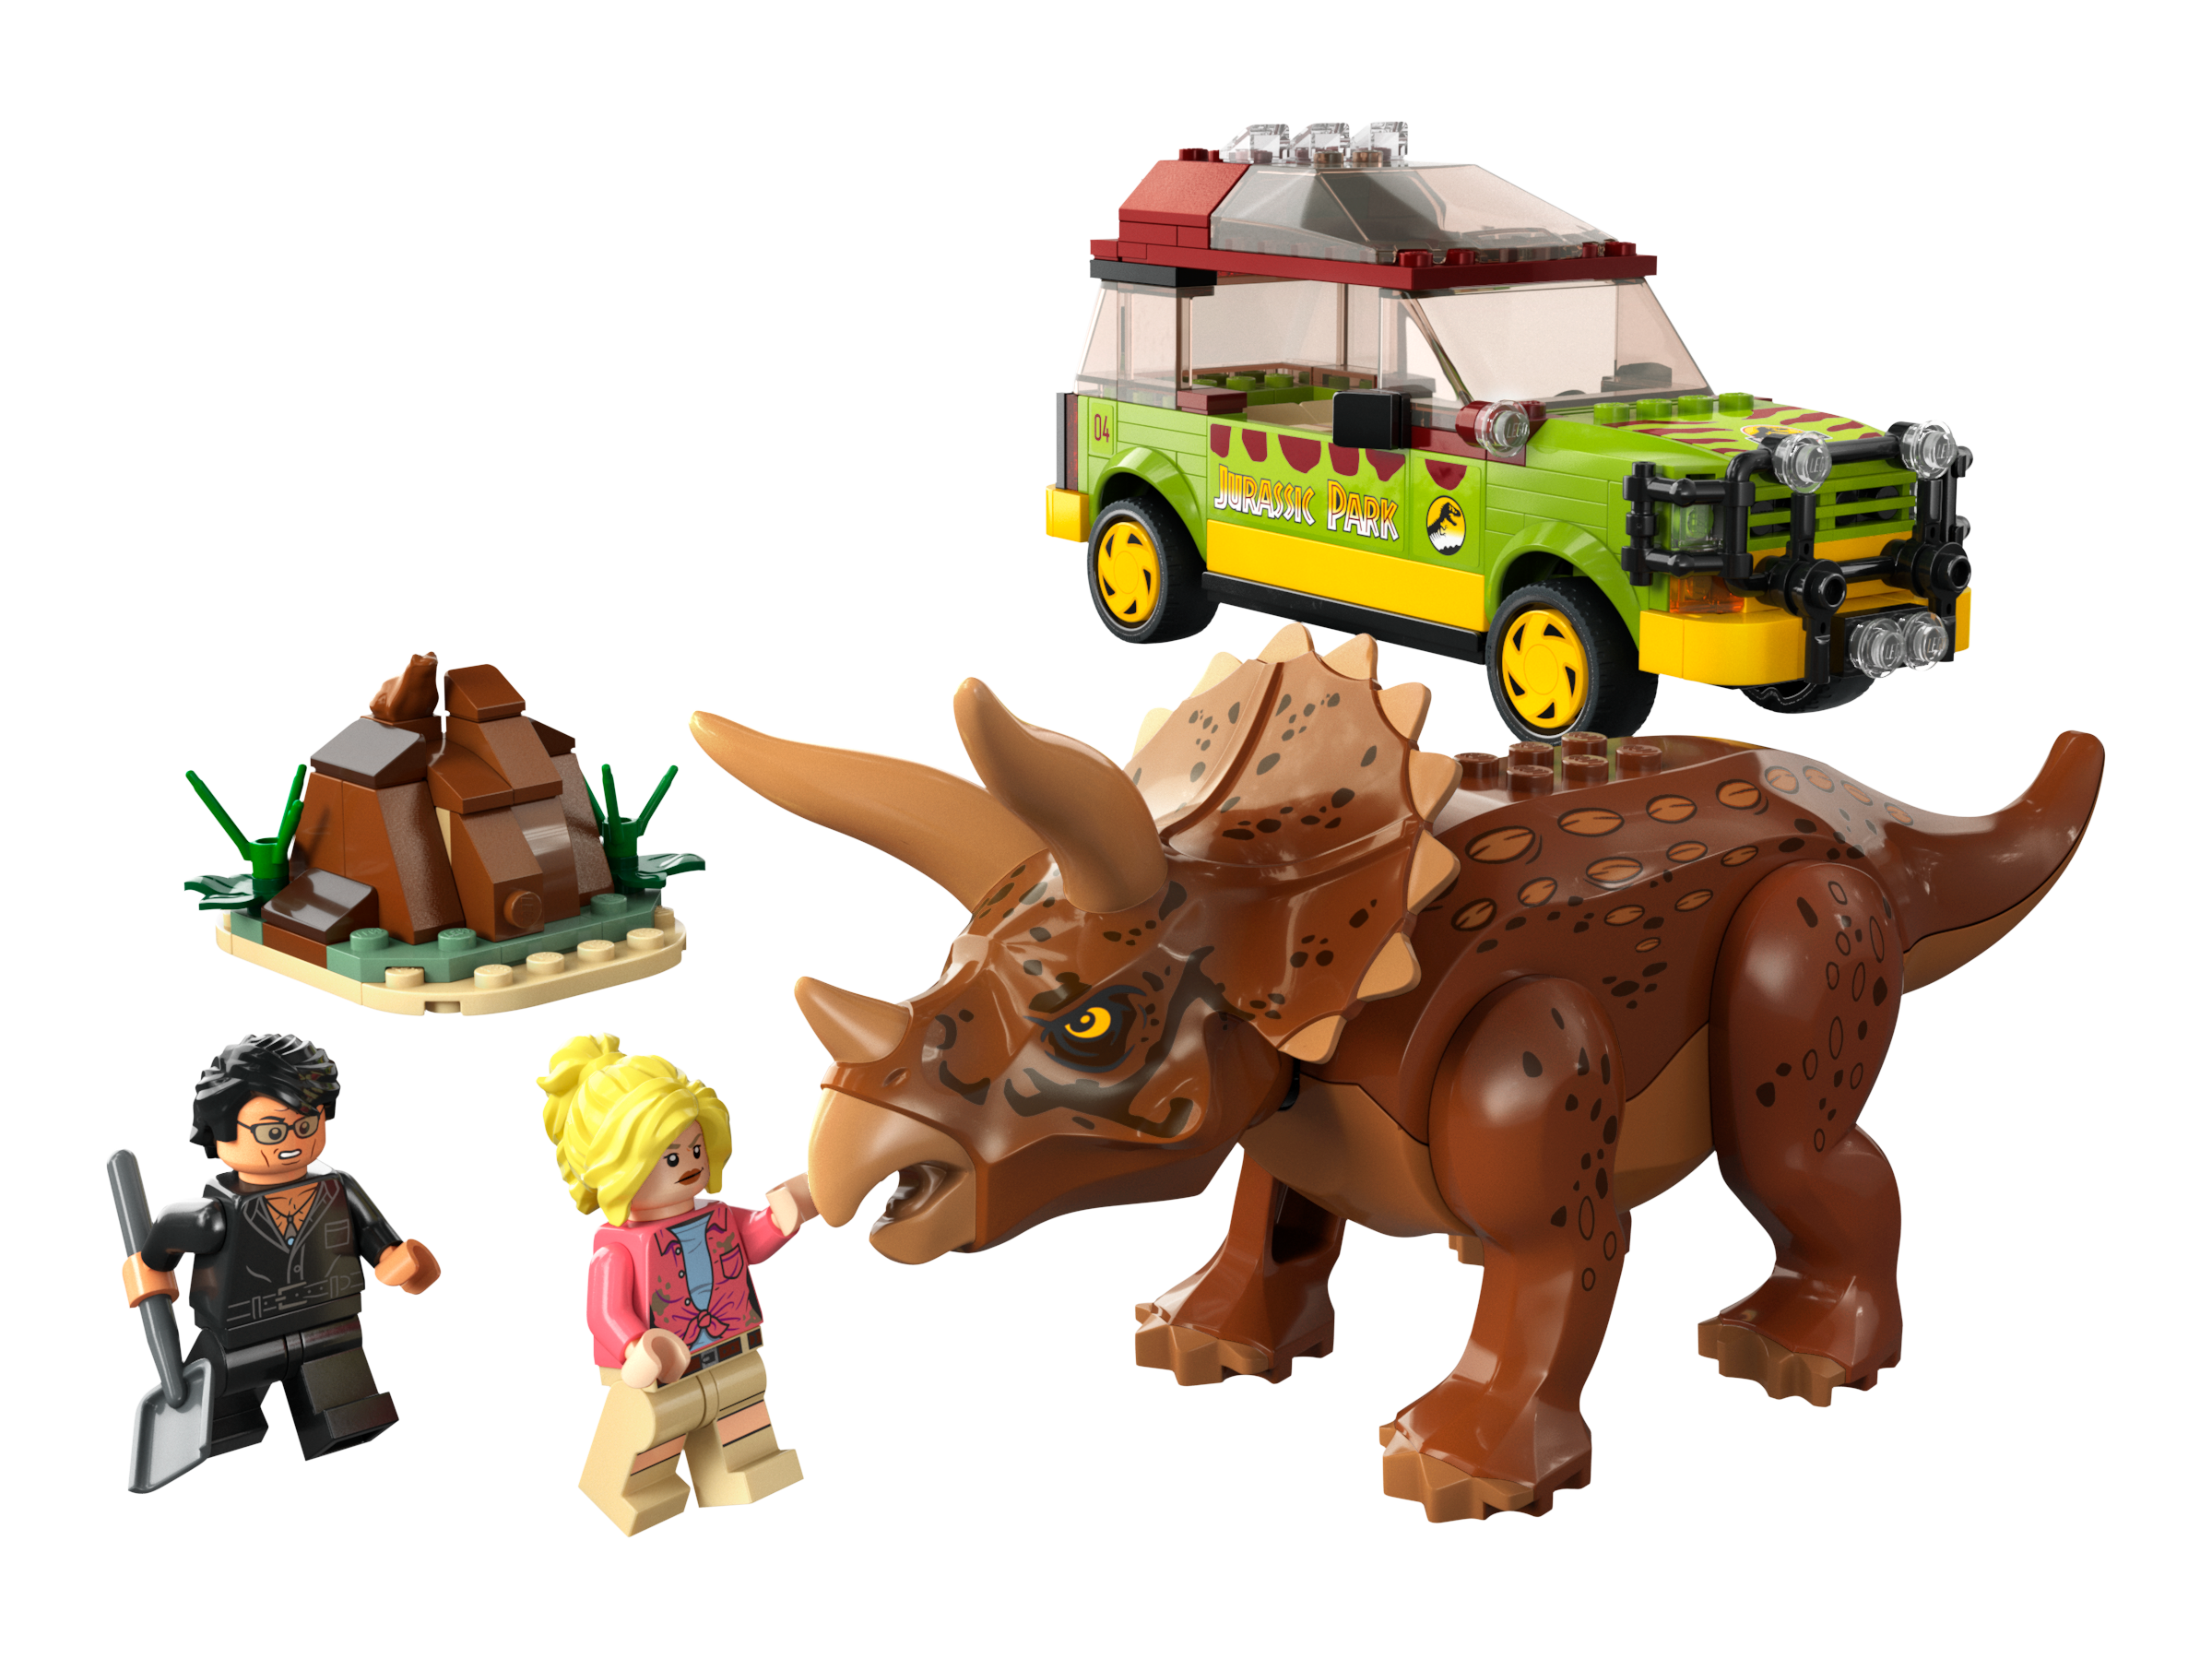 Afgang Garderobe Repressalier Jurassic World Toys and Gifts | Official LEGO® Shop US